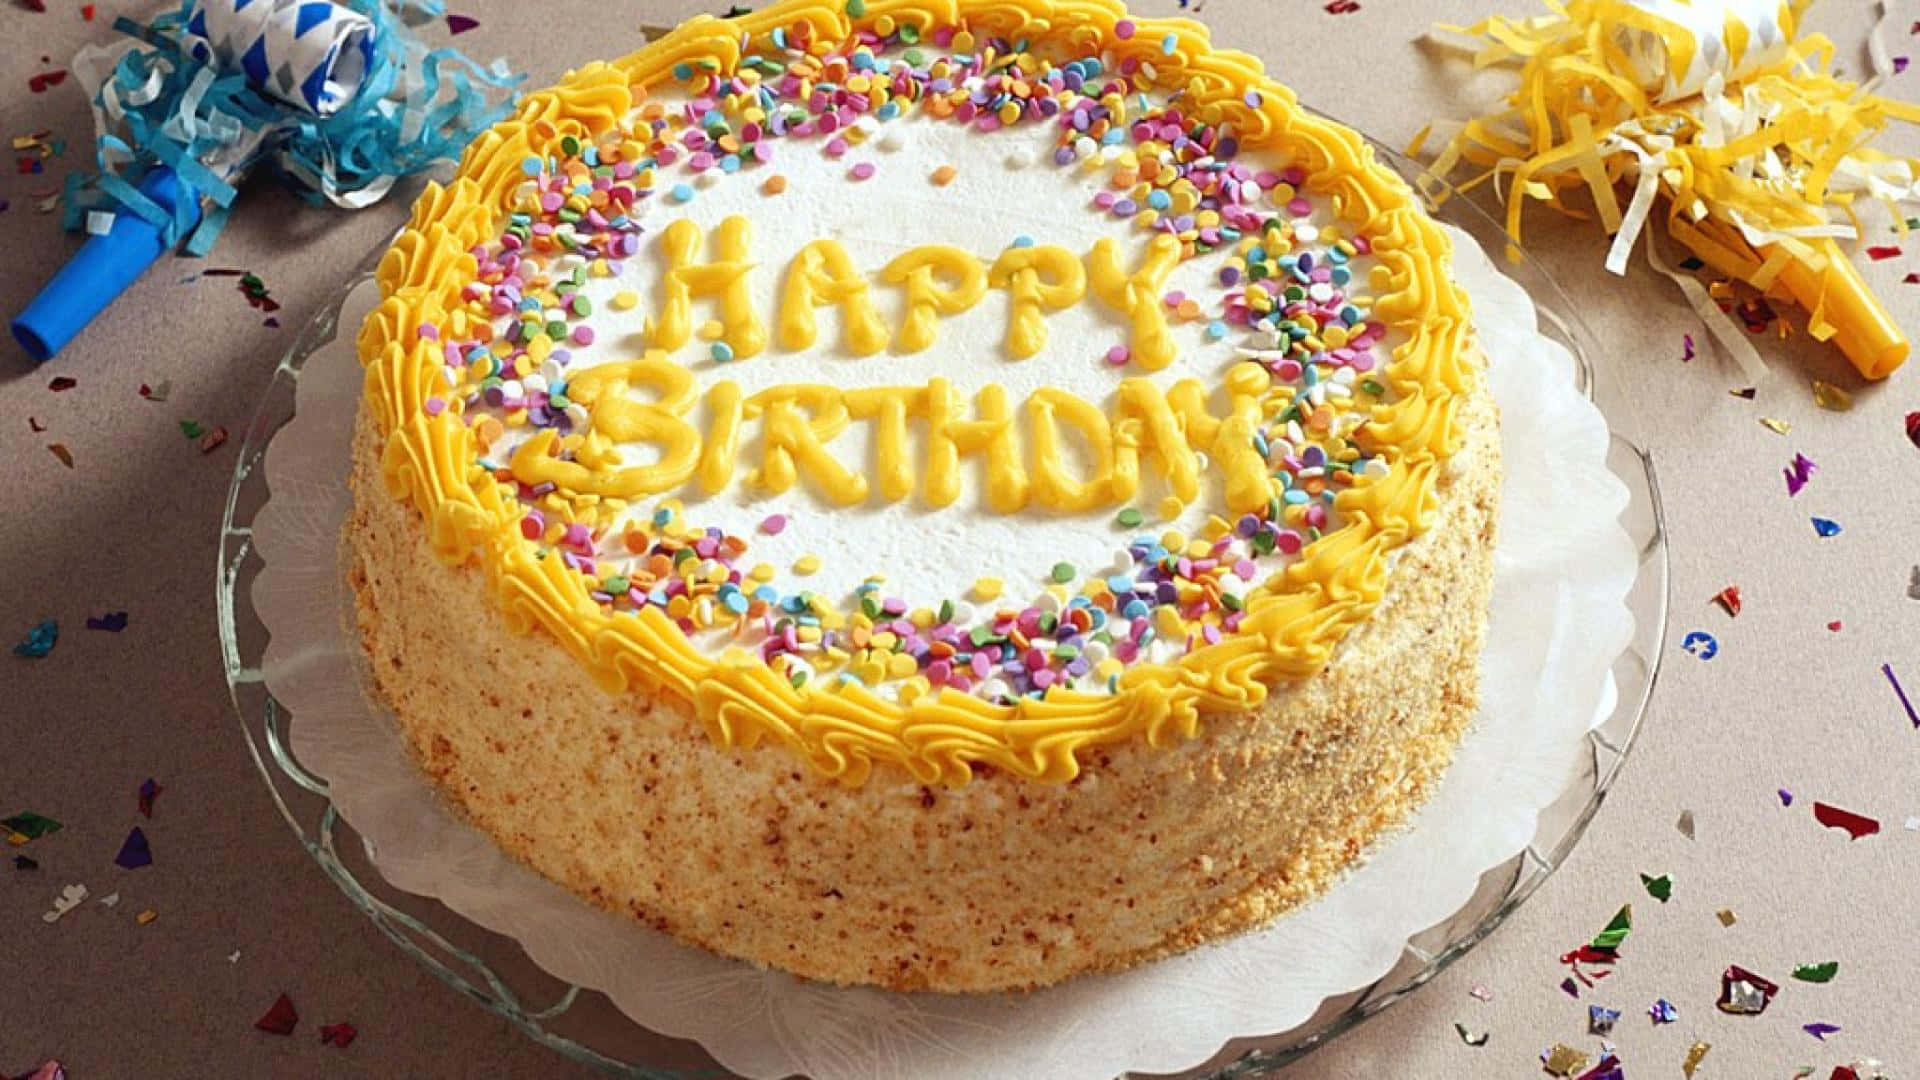 Happy Birthday Cake Pictures - Download & Share | Happy birthday cake  pictures, Happy birthday cakes, Cool birthday cakes